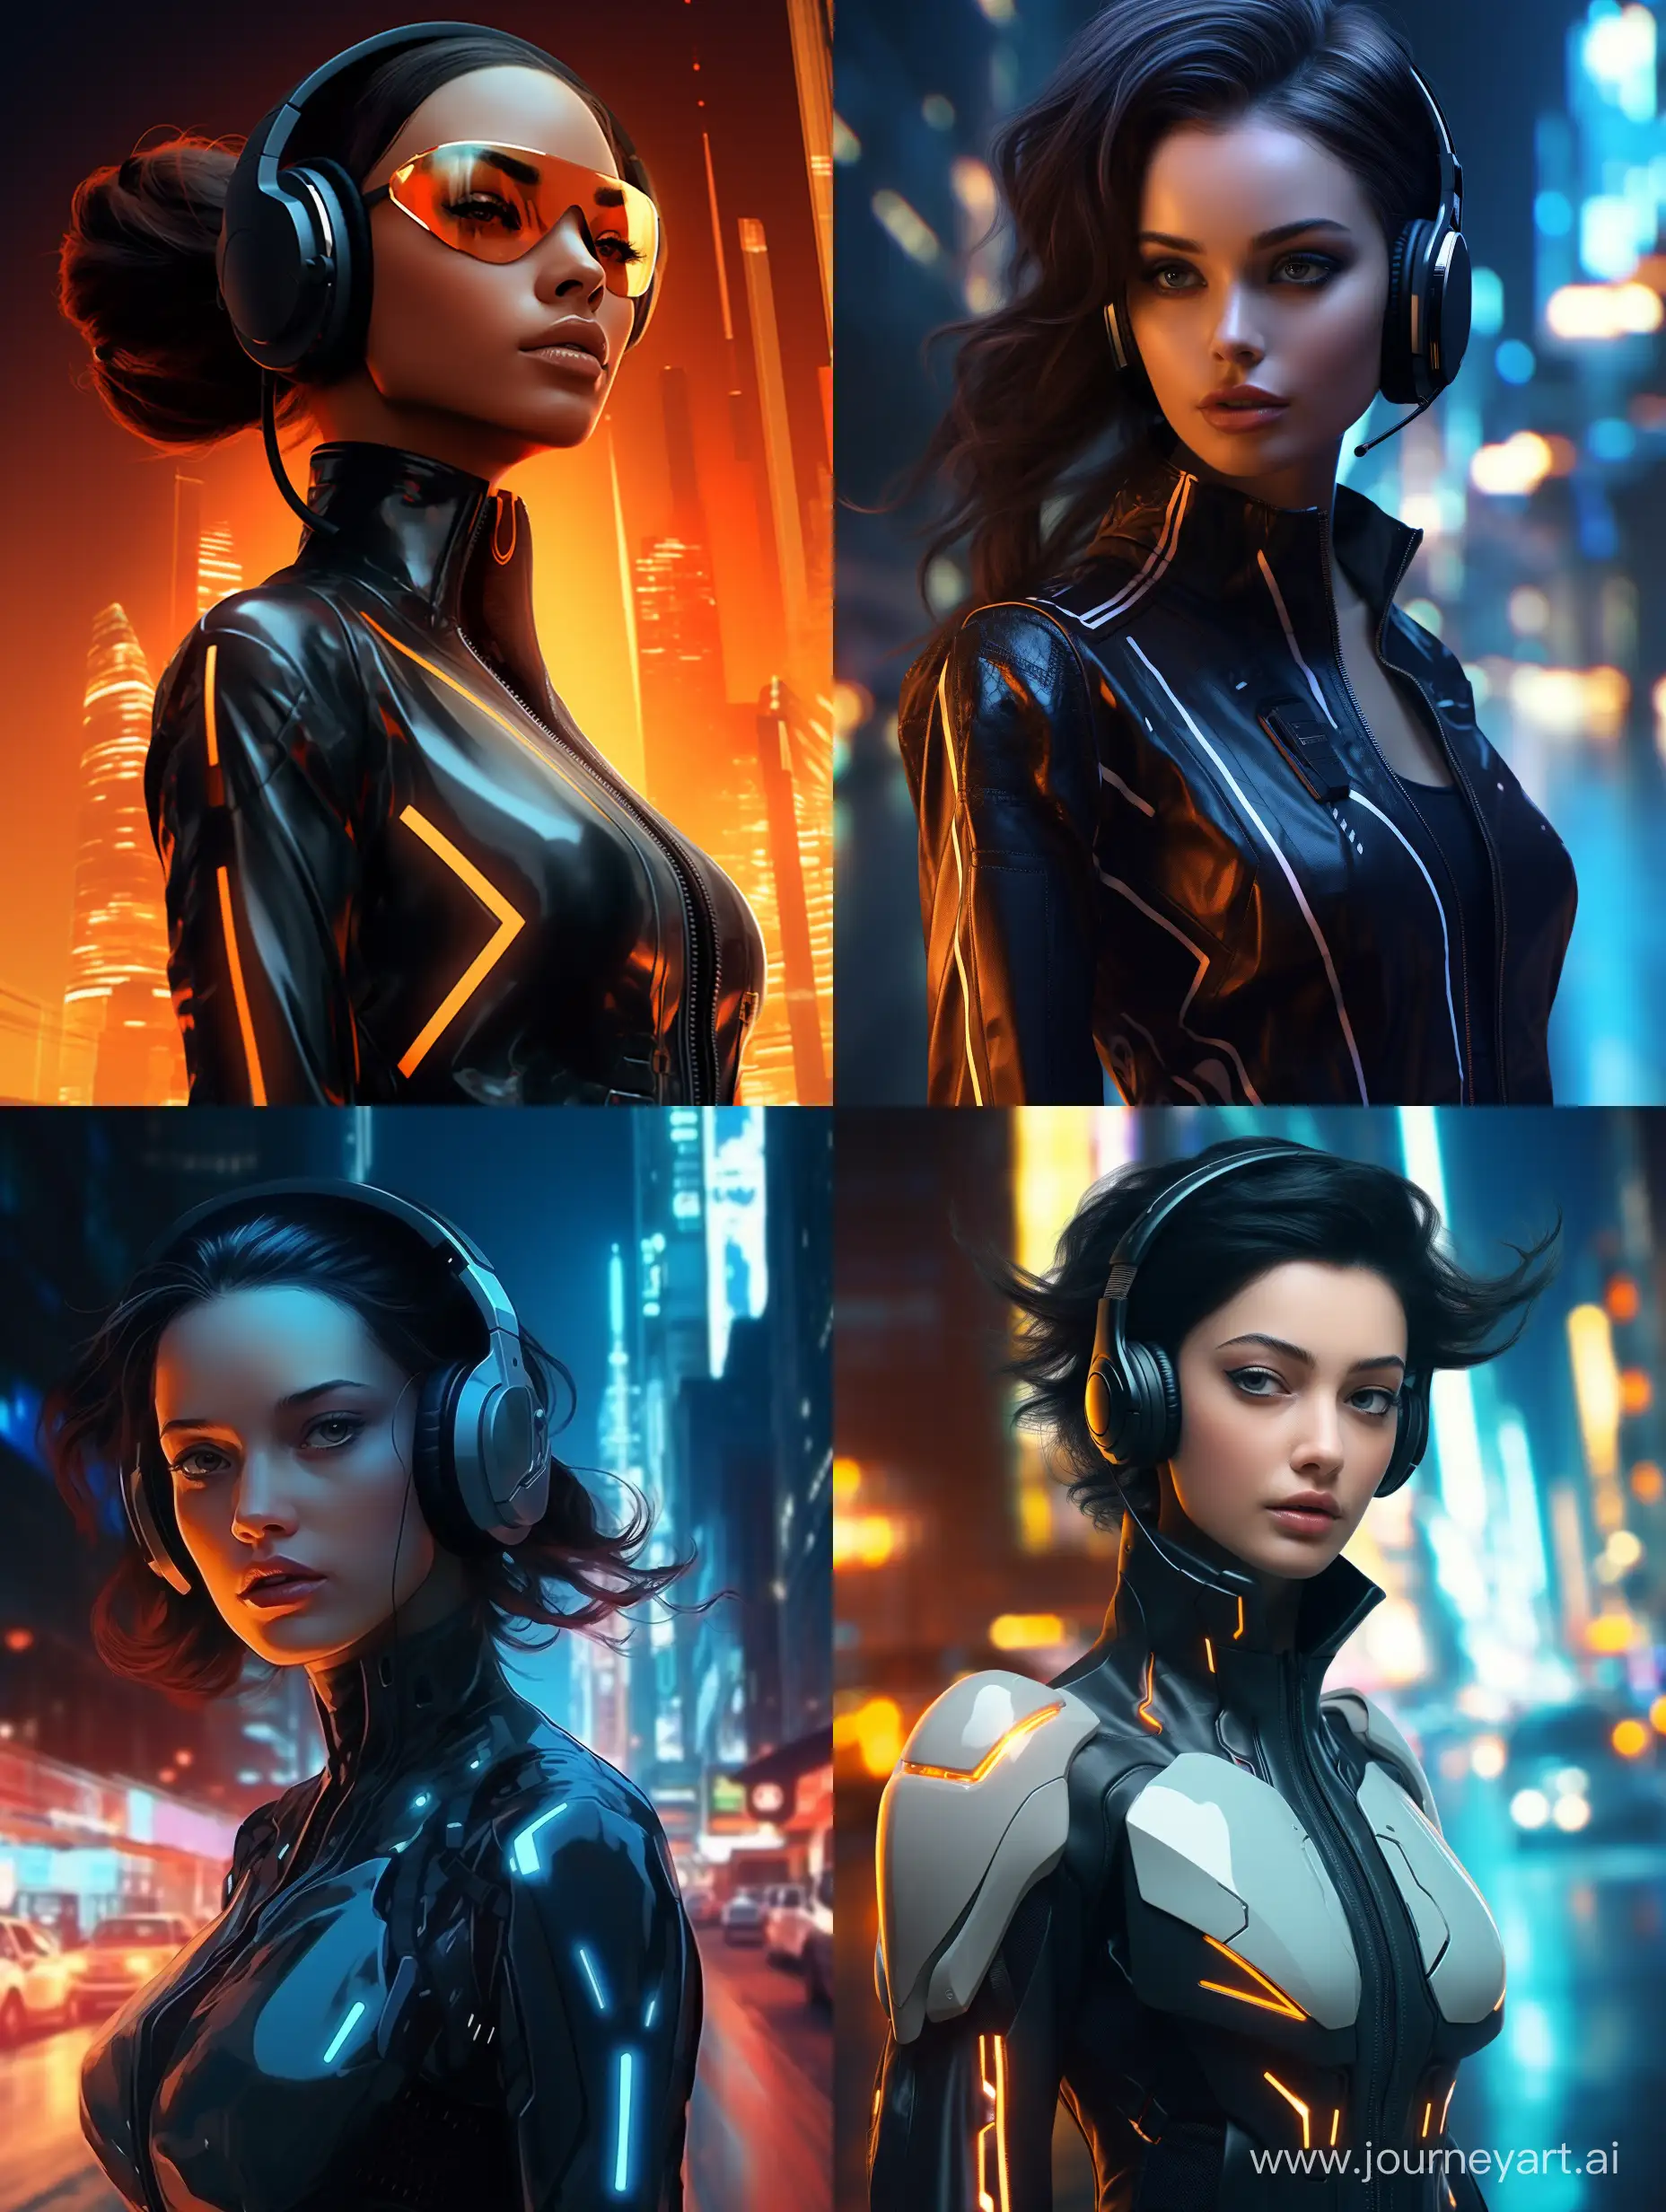 A cyber woman wears a jacket and headphone in neck, wandering in night futuristic city, tron legacy, sister, android woman, detailed face and clothings, cinematic lighting